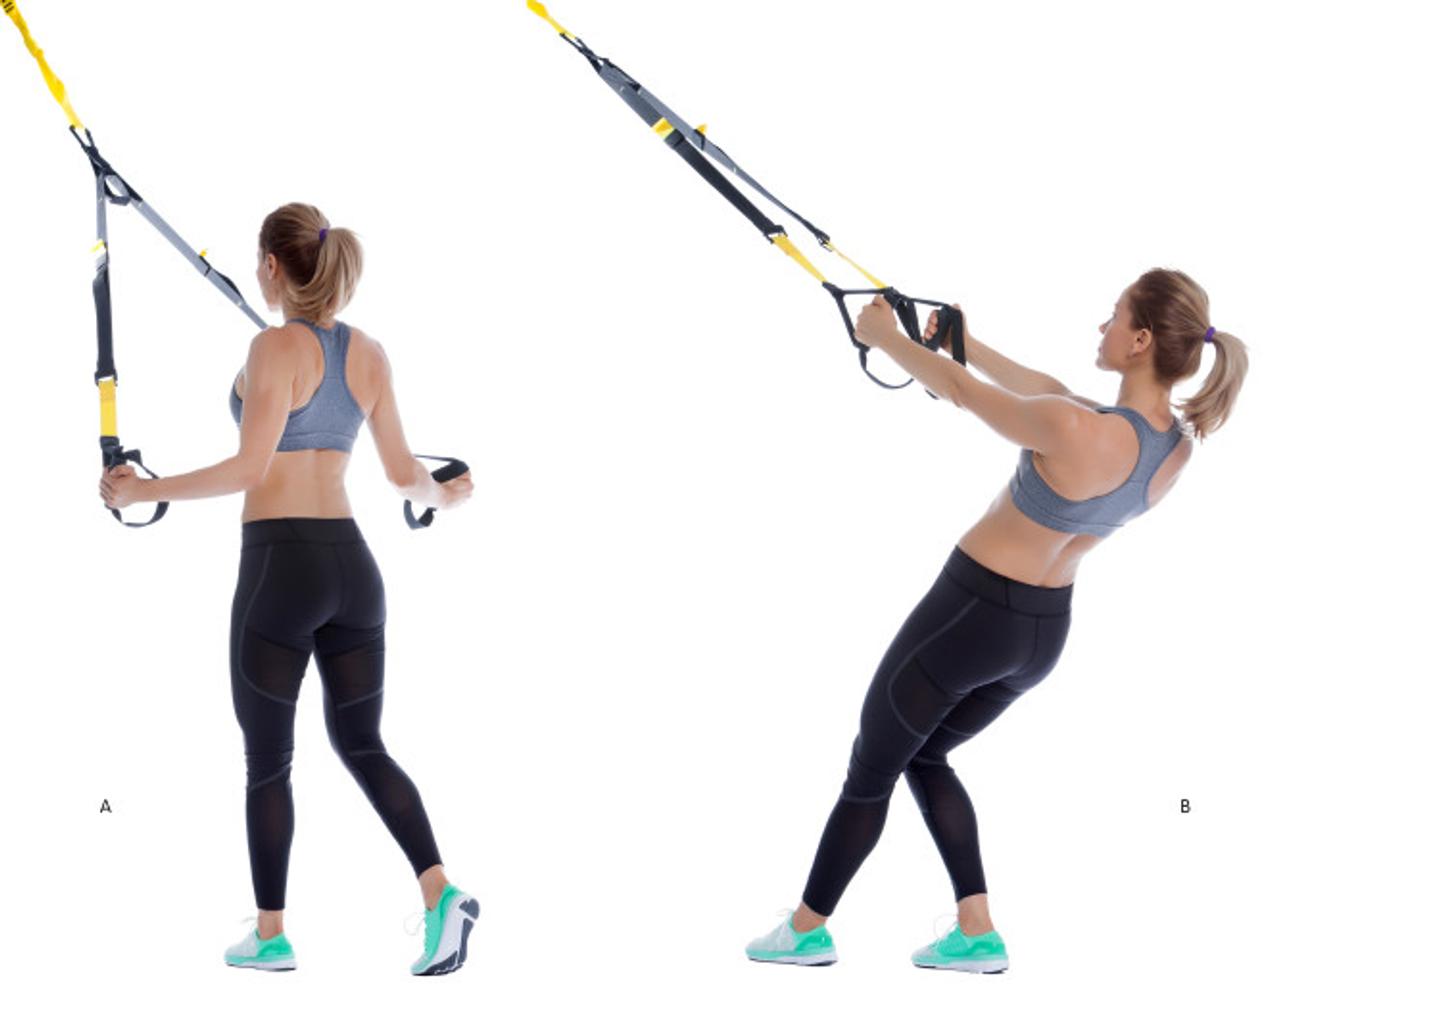 ISSA, International Sports Sciences Association, Certified Personal Trainer, ISSAonline, ISSA x TRX: Best TRX Exercises to Enhance Your Training Low Row